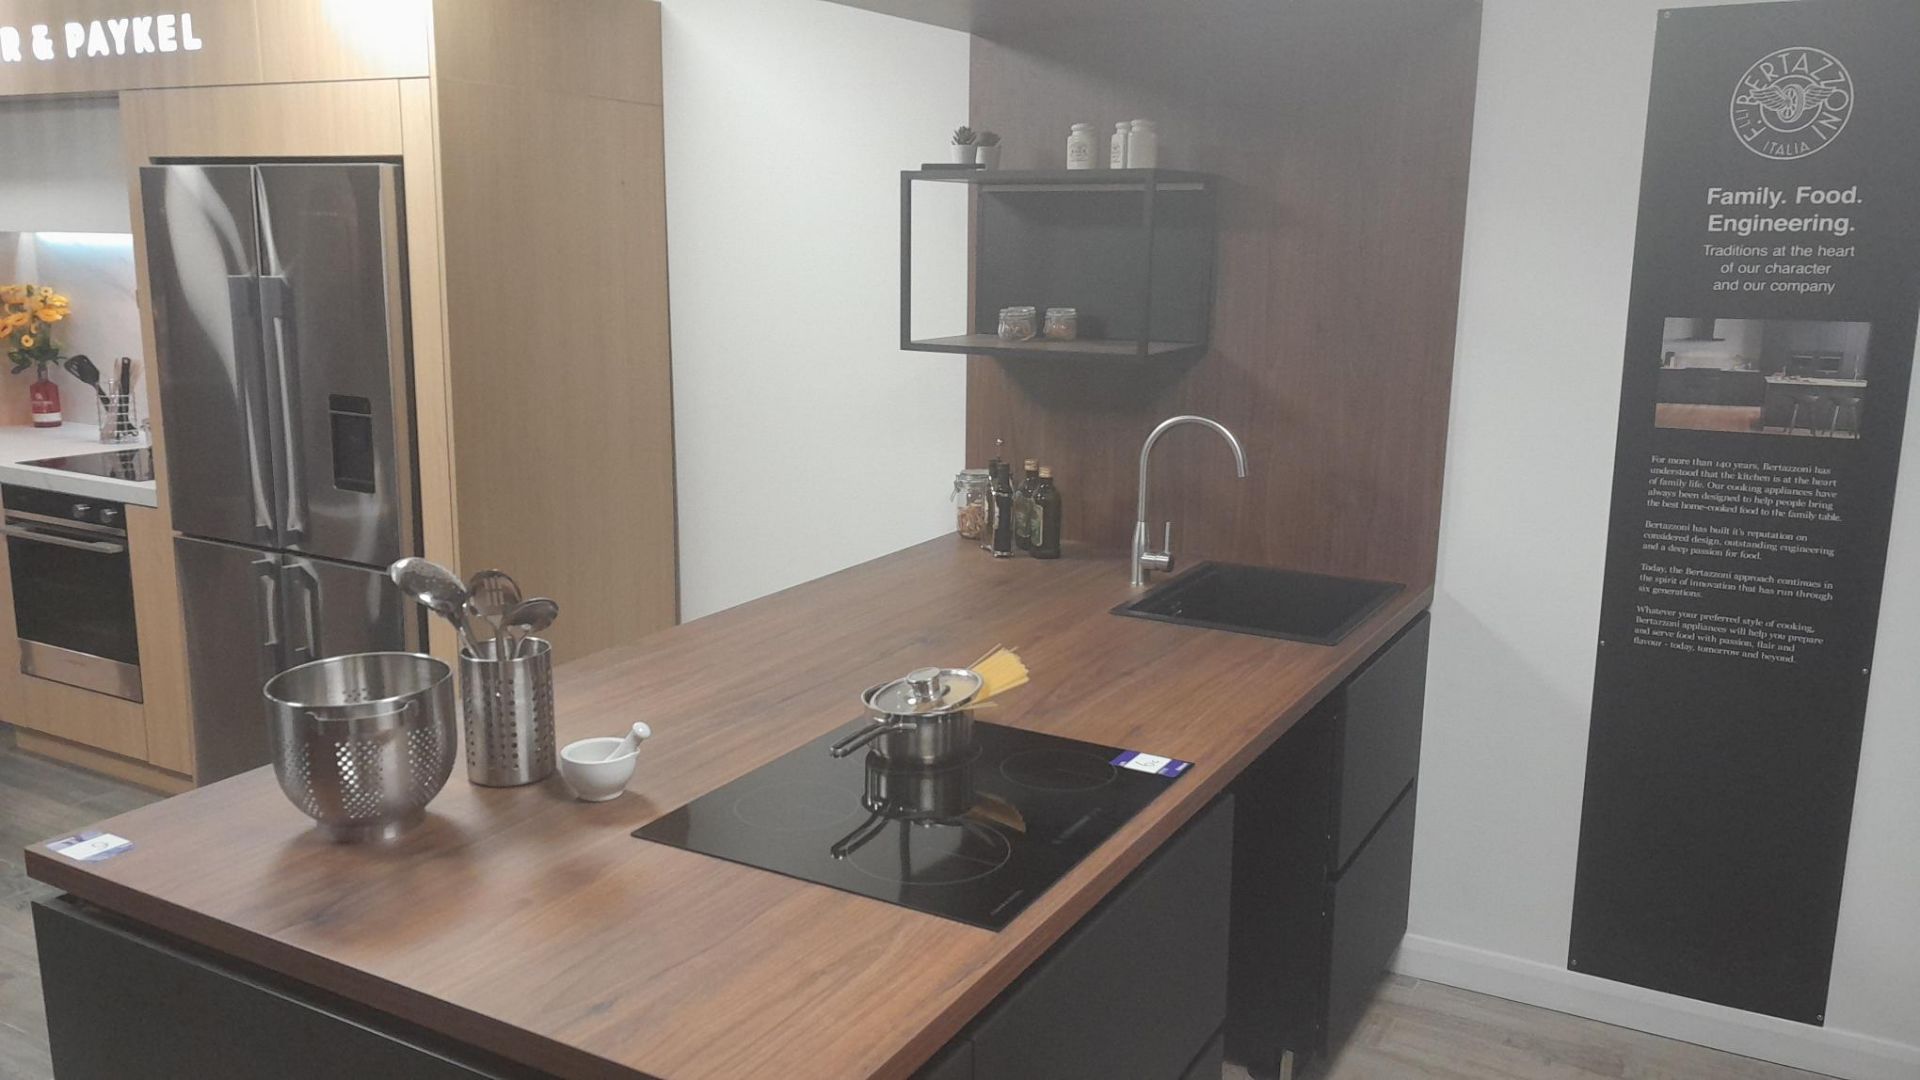 Hacker Top Soft Black and Walnut handleless ex display kitchen, with Schock undermount sink and tap. - Image 4 of 7